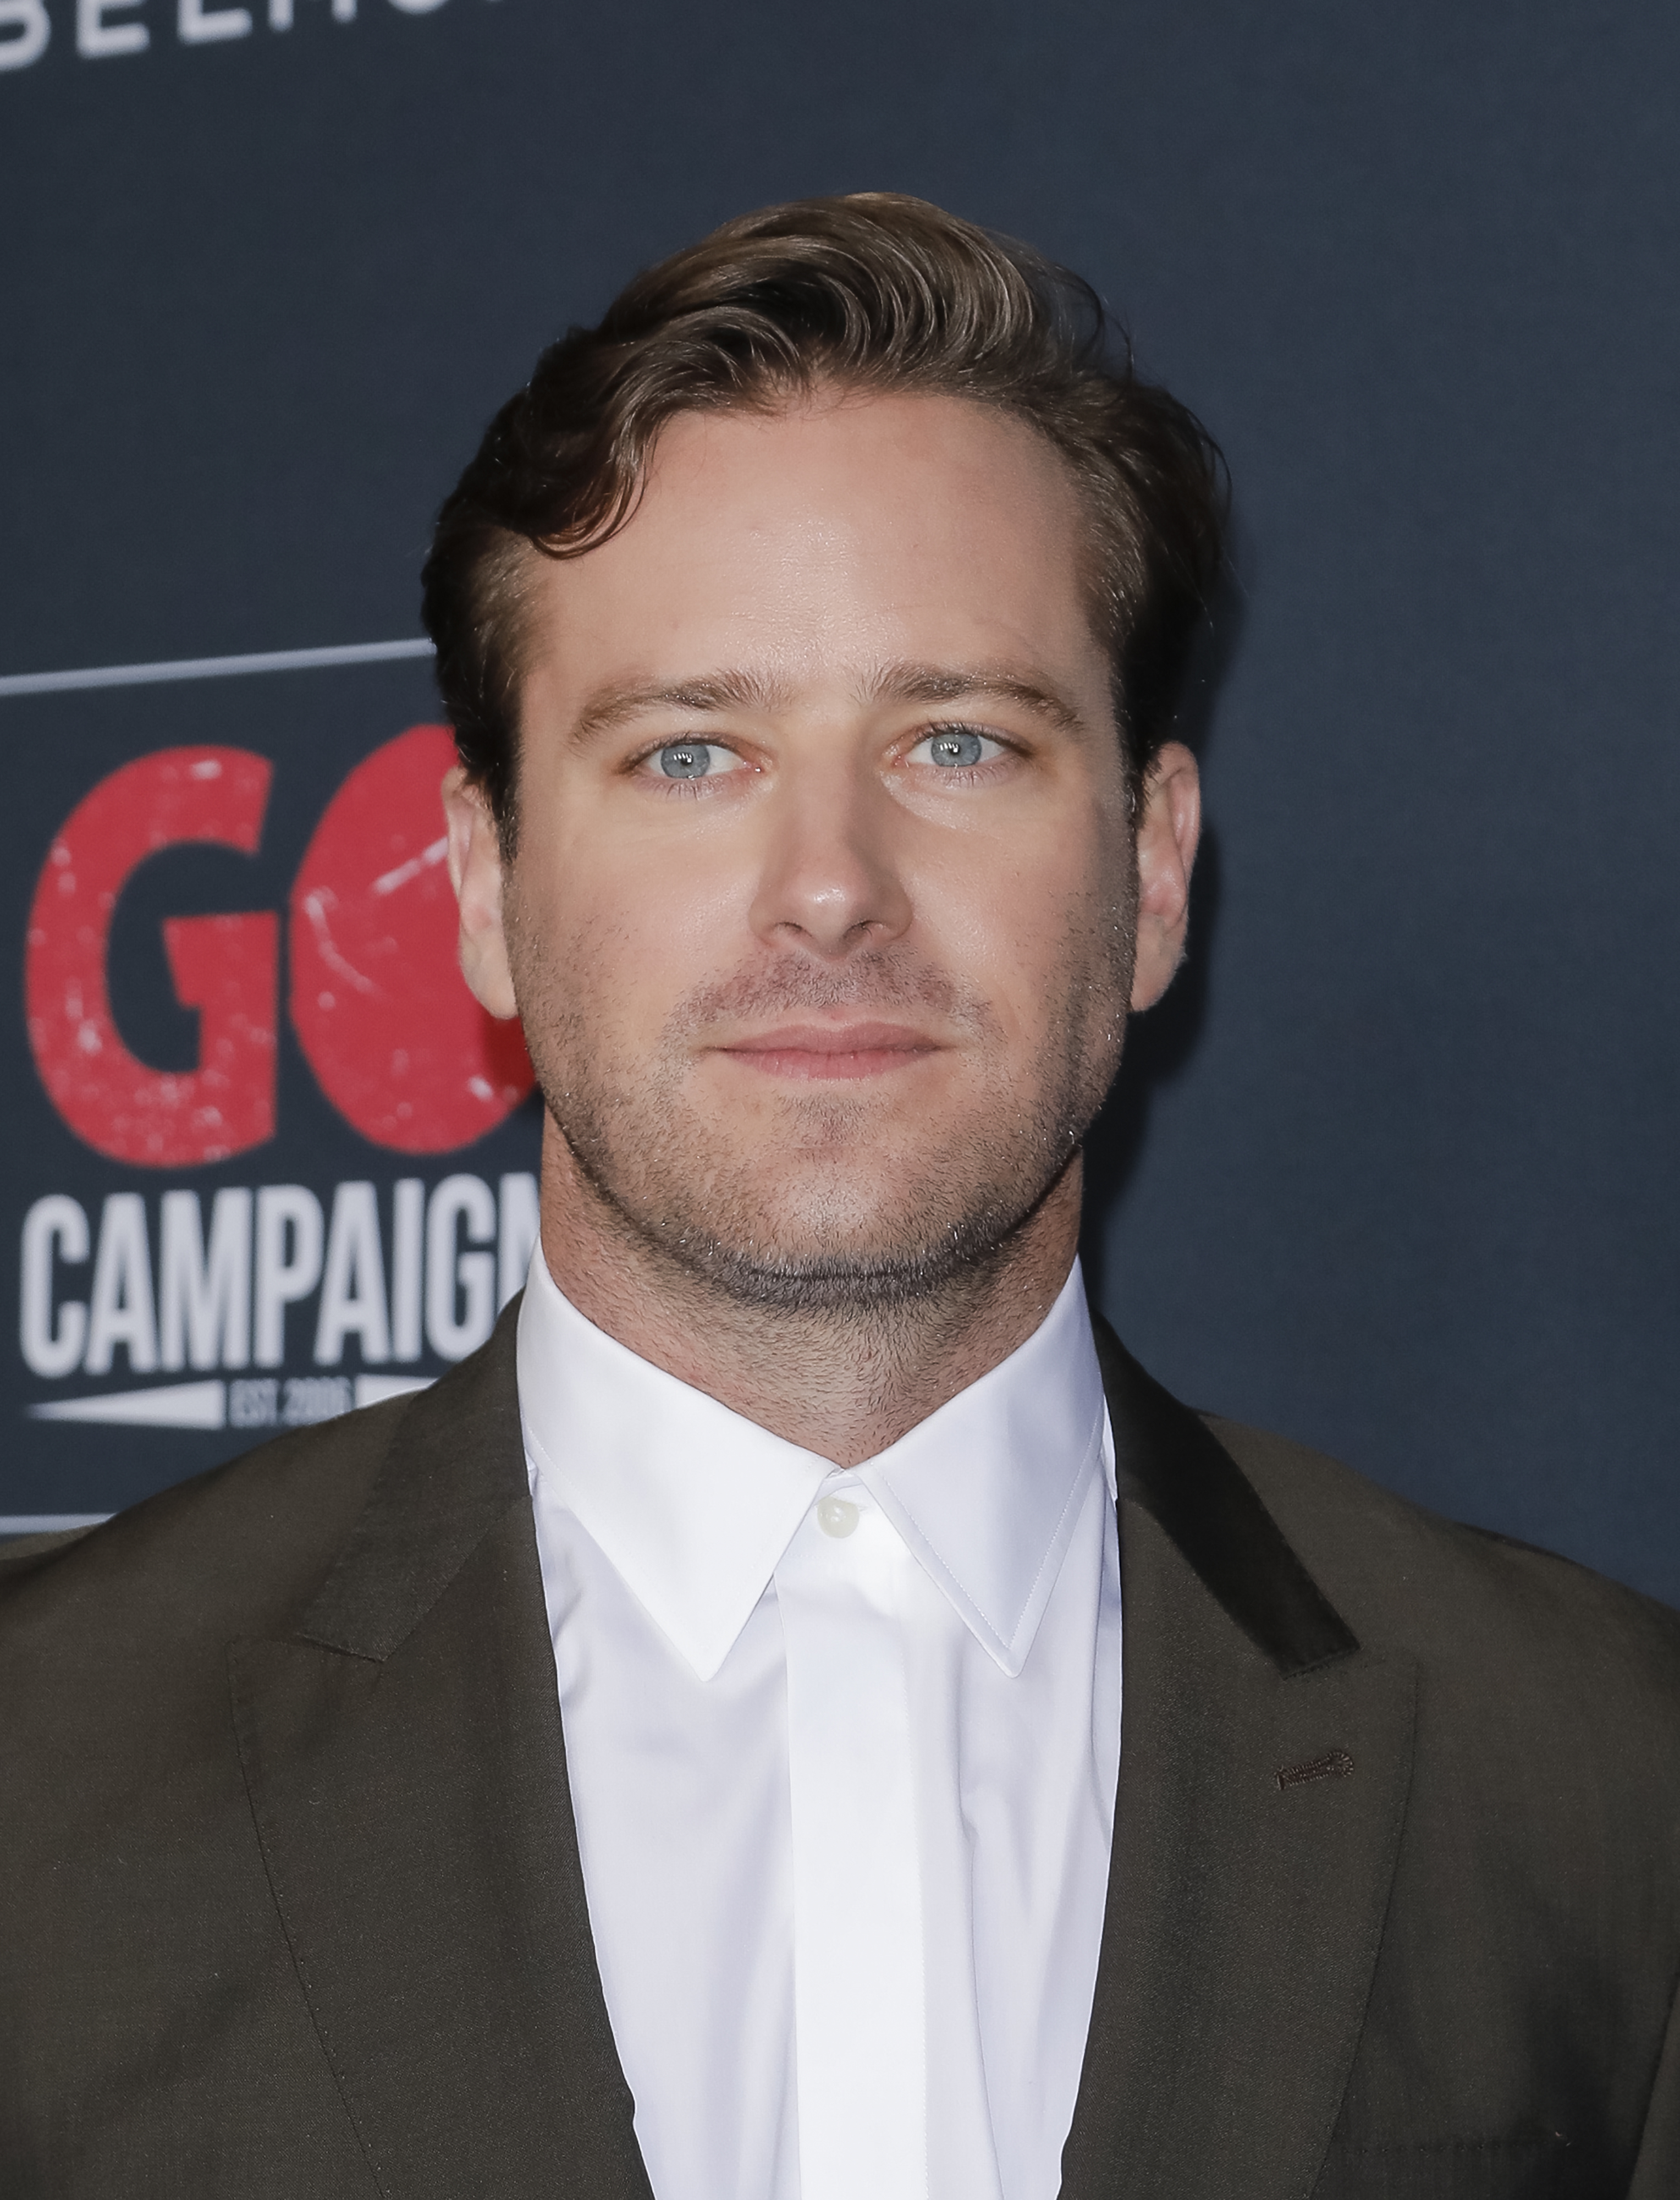 Close-up of Armie in a suit and tie at a media event